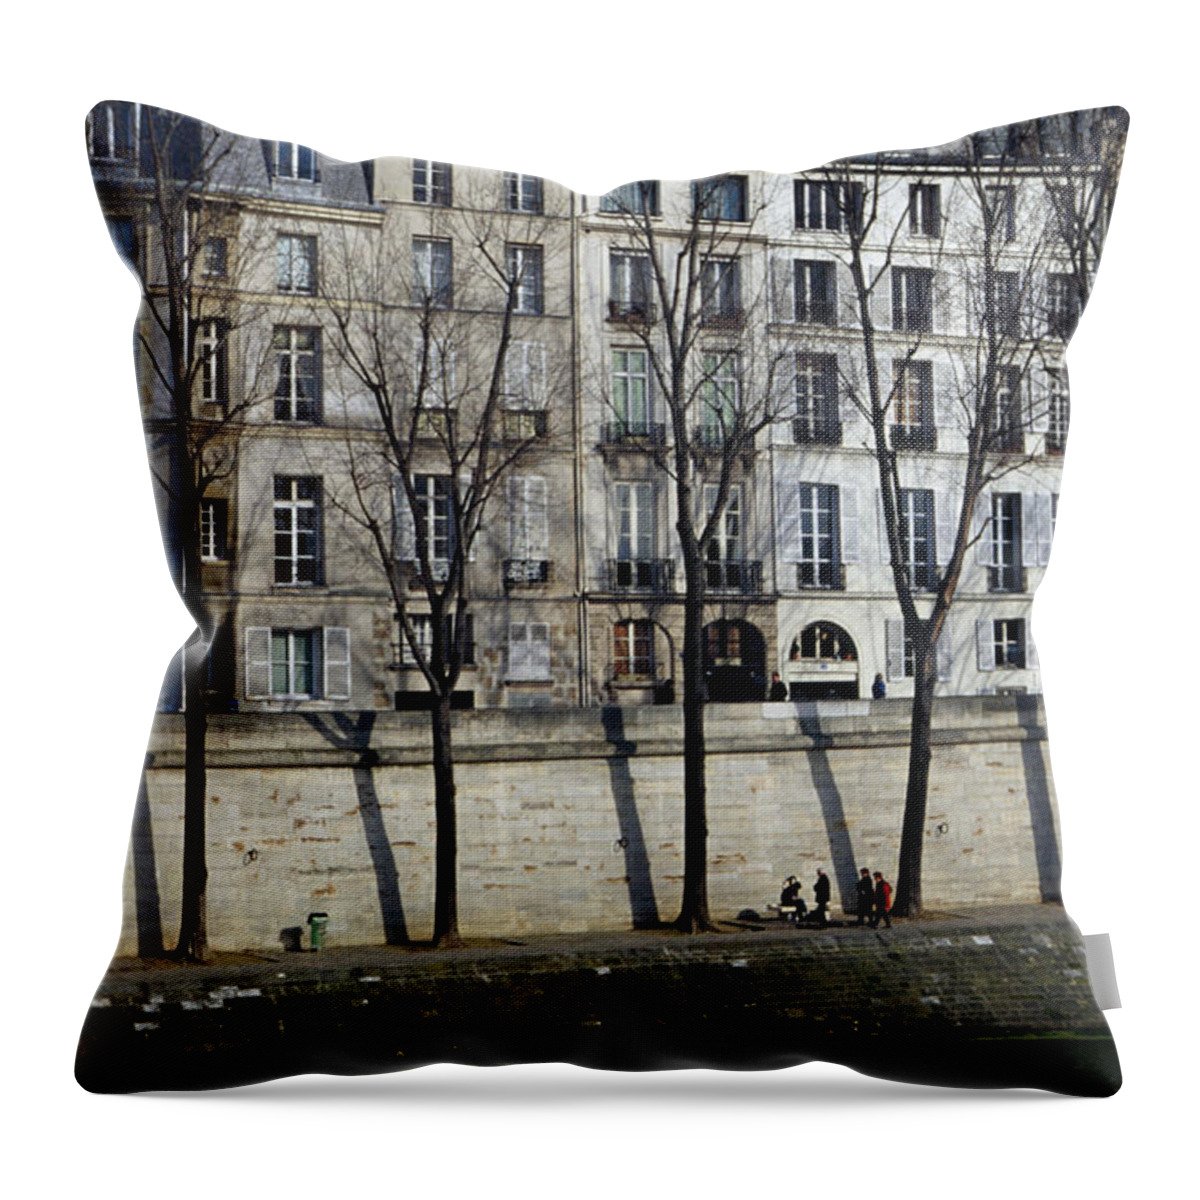 Built Structure Throw Pillow featuring the photograph Buildings On Ile Saint-louis by Lonely Planet